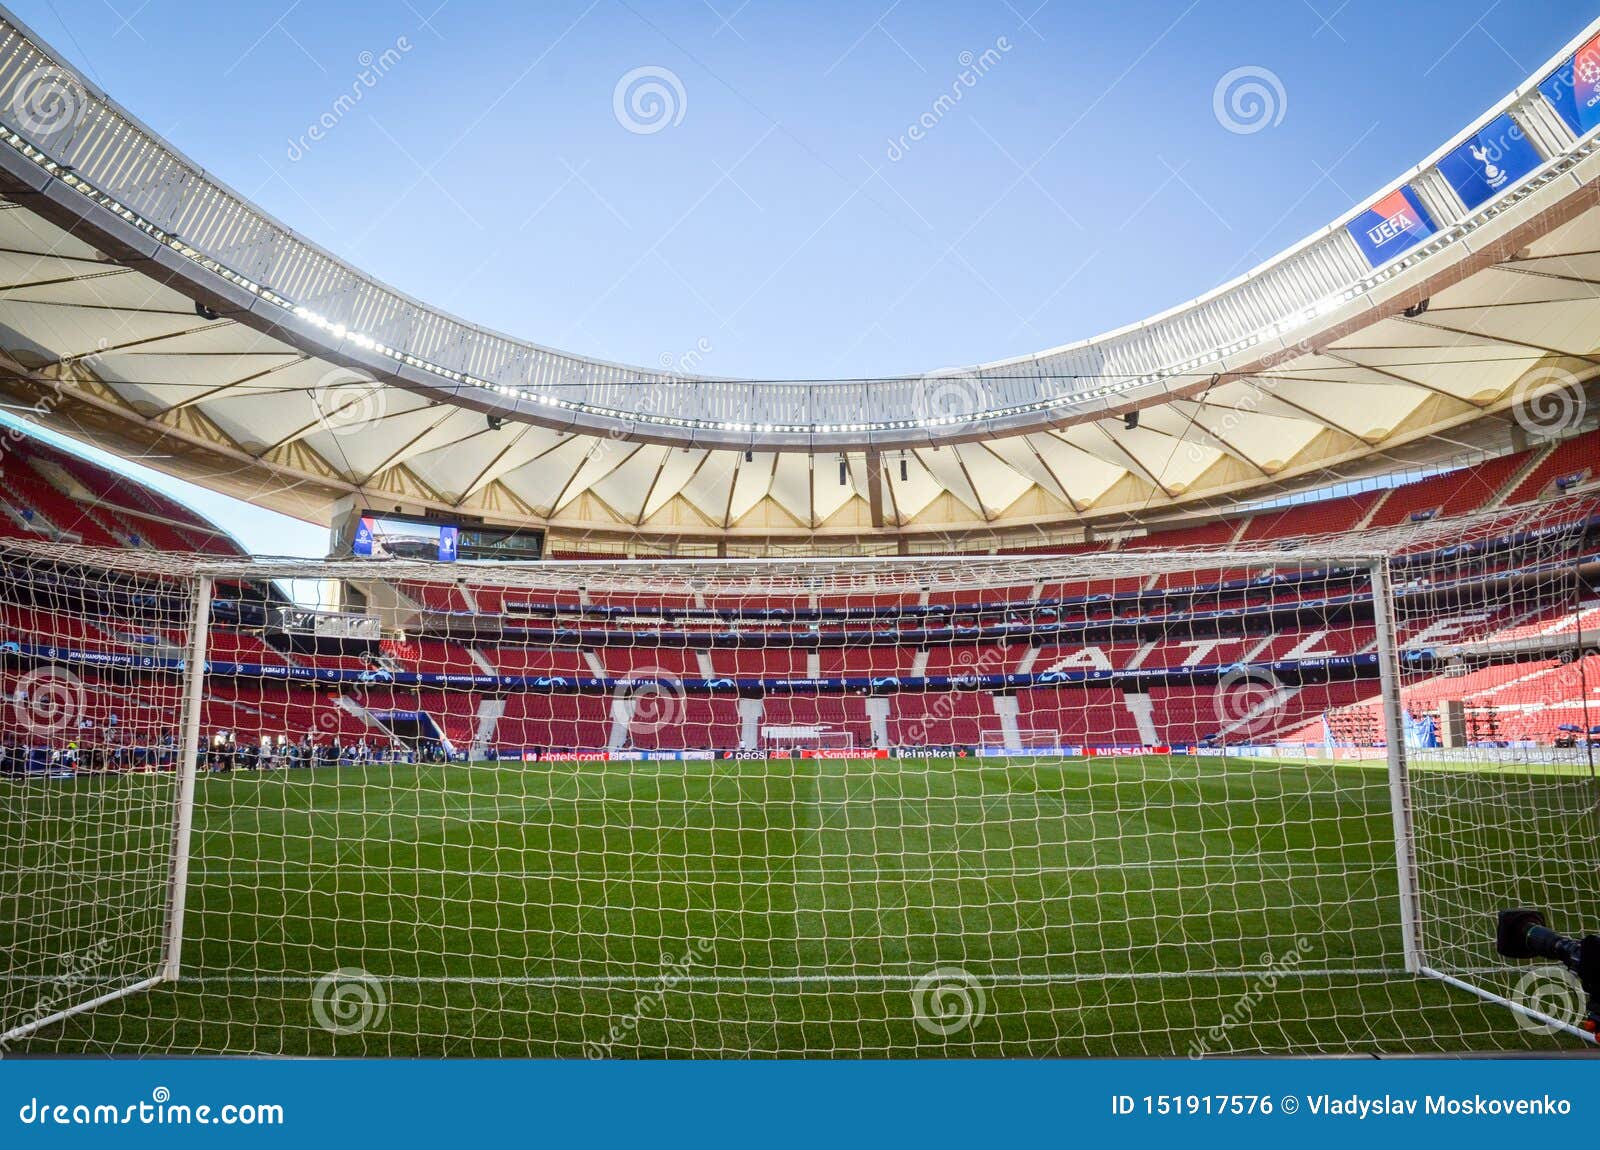 Madrid Spain 01 May 19 General View Of The Wanda Metropolitano Stadium Behind The Gate In Daytime During The Uefa Champions Editorial Photo Image Of Sport Soccer